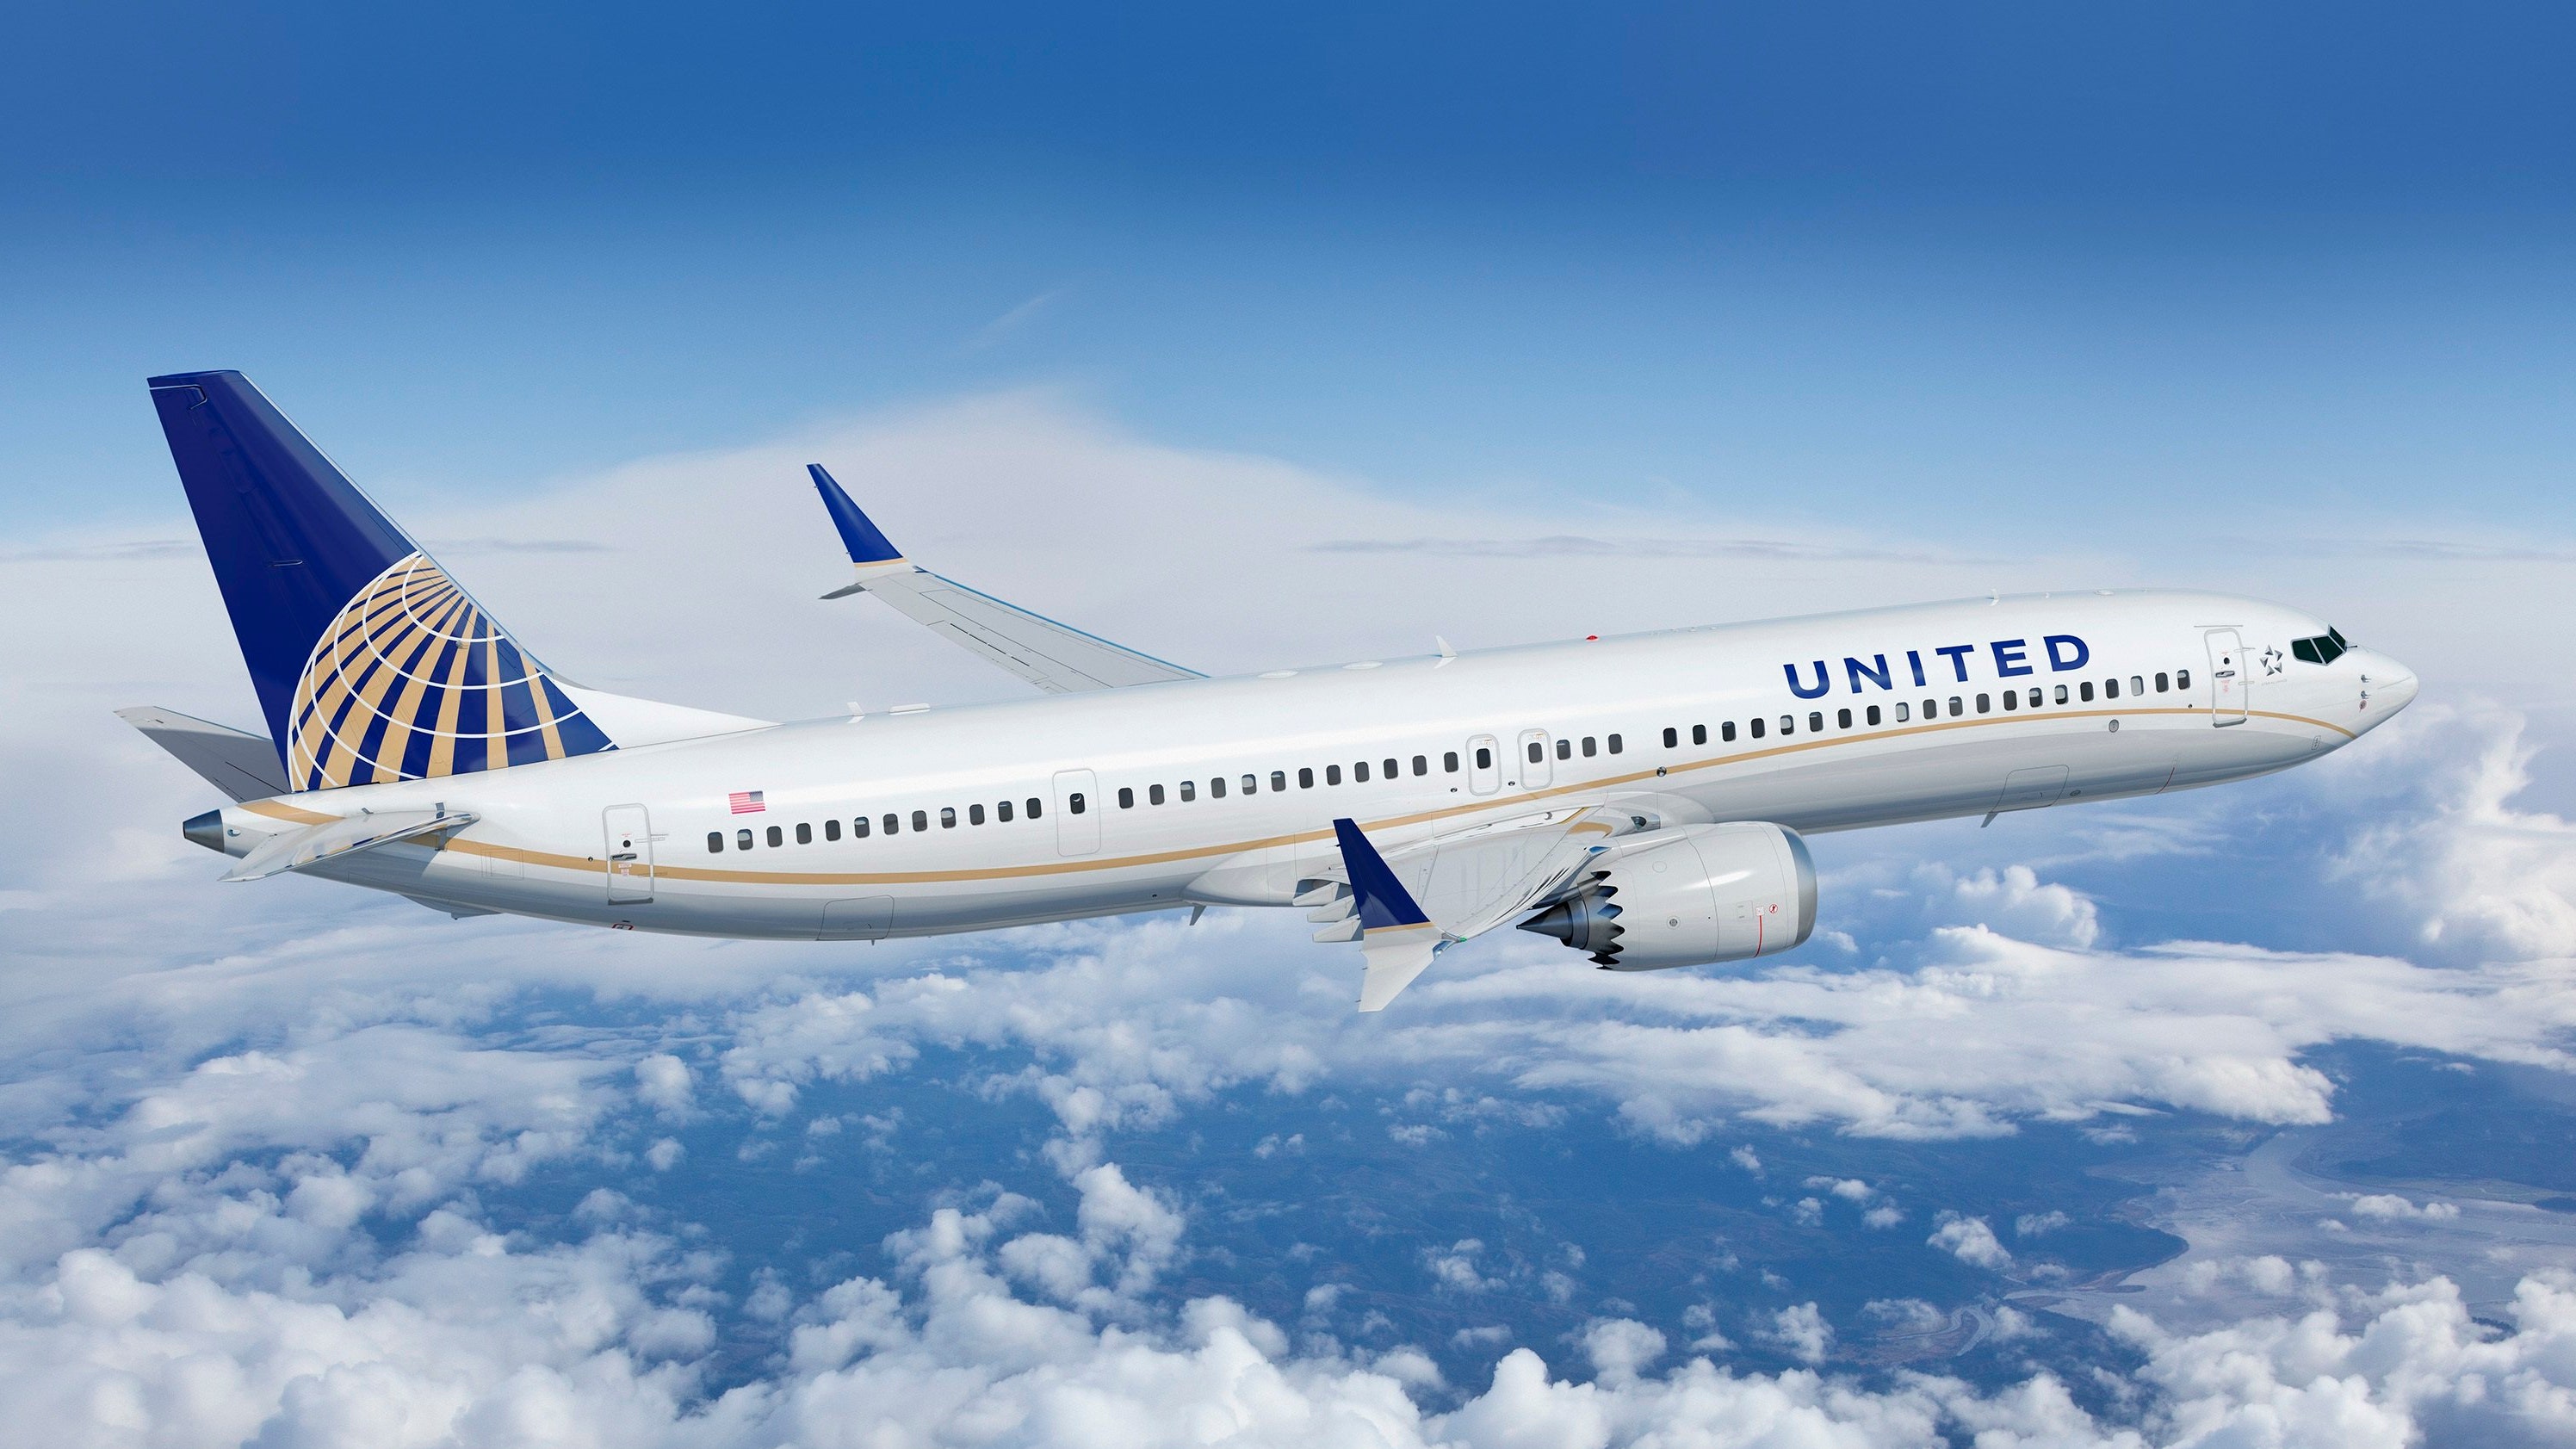 Airlines united United Airlines